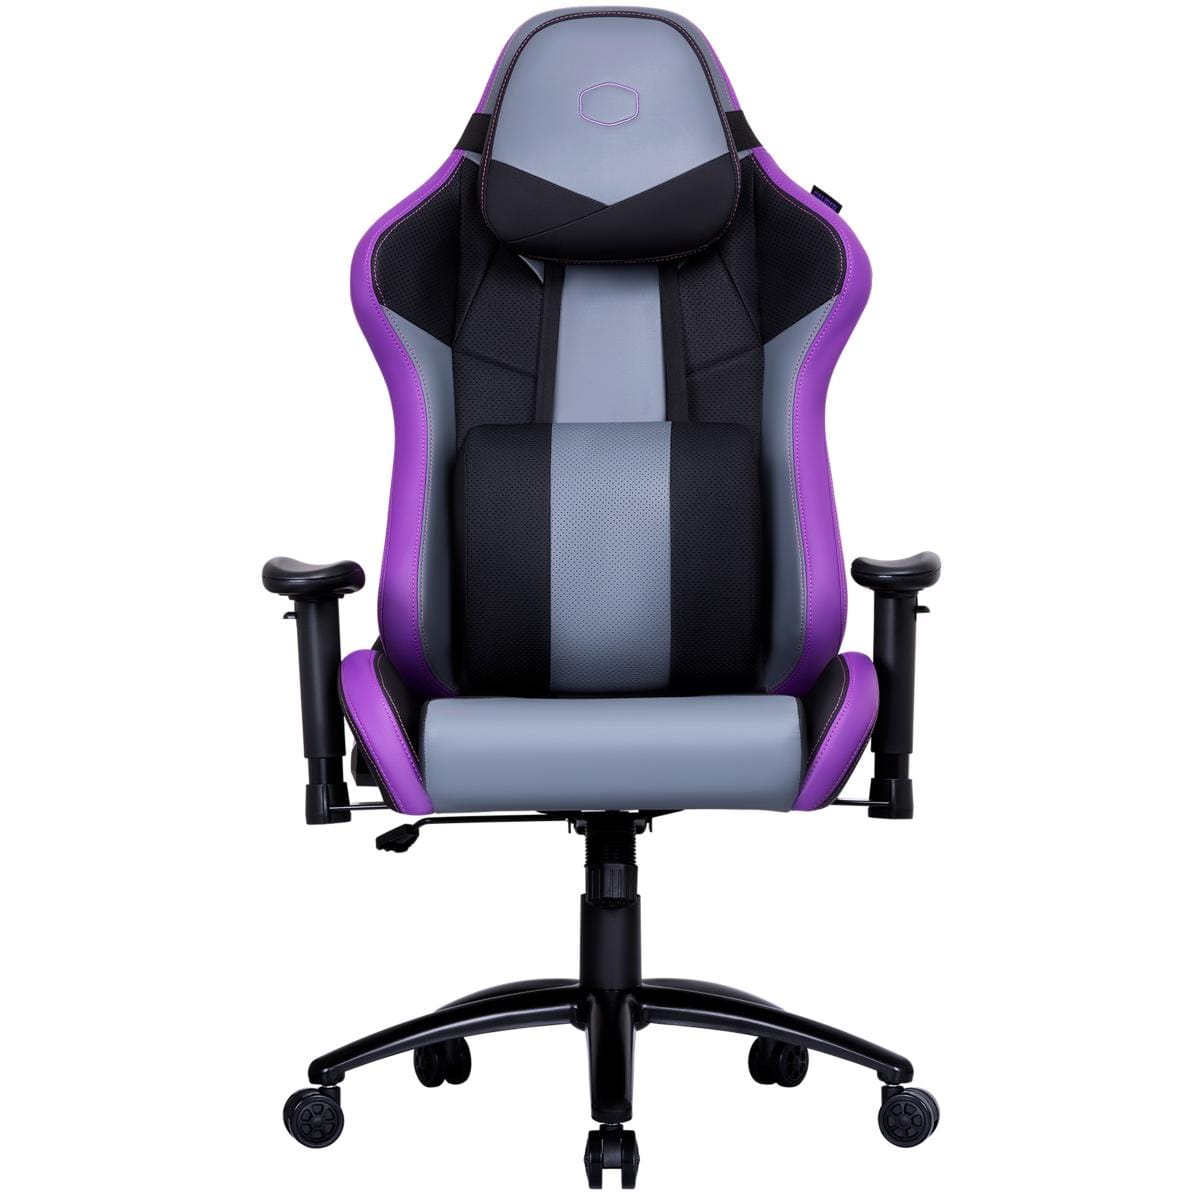 ASUS Gaming Chairs Cooler Master Caliber R3 Gaming Chair (Black -Purple), Steel Frame, Ultra Comfortable Memory Foam & PU, 2D Armrest, Up To 180° Recline & 150KG Max Weight Load